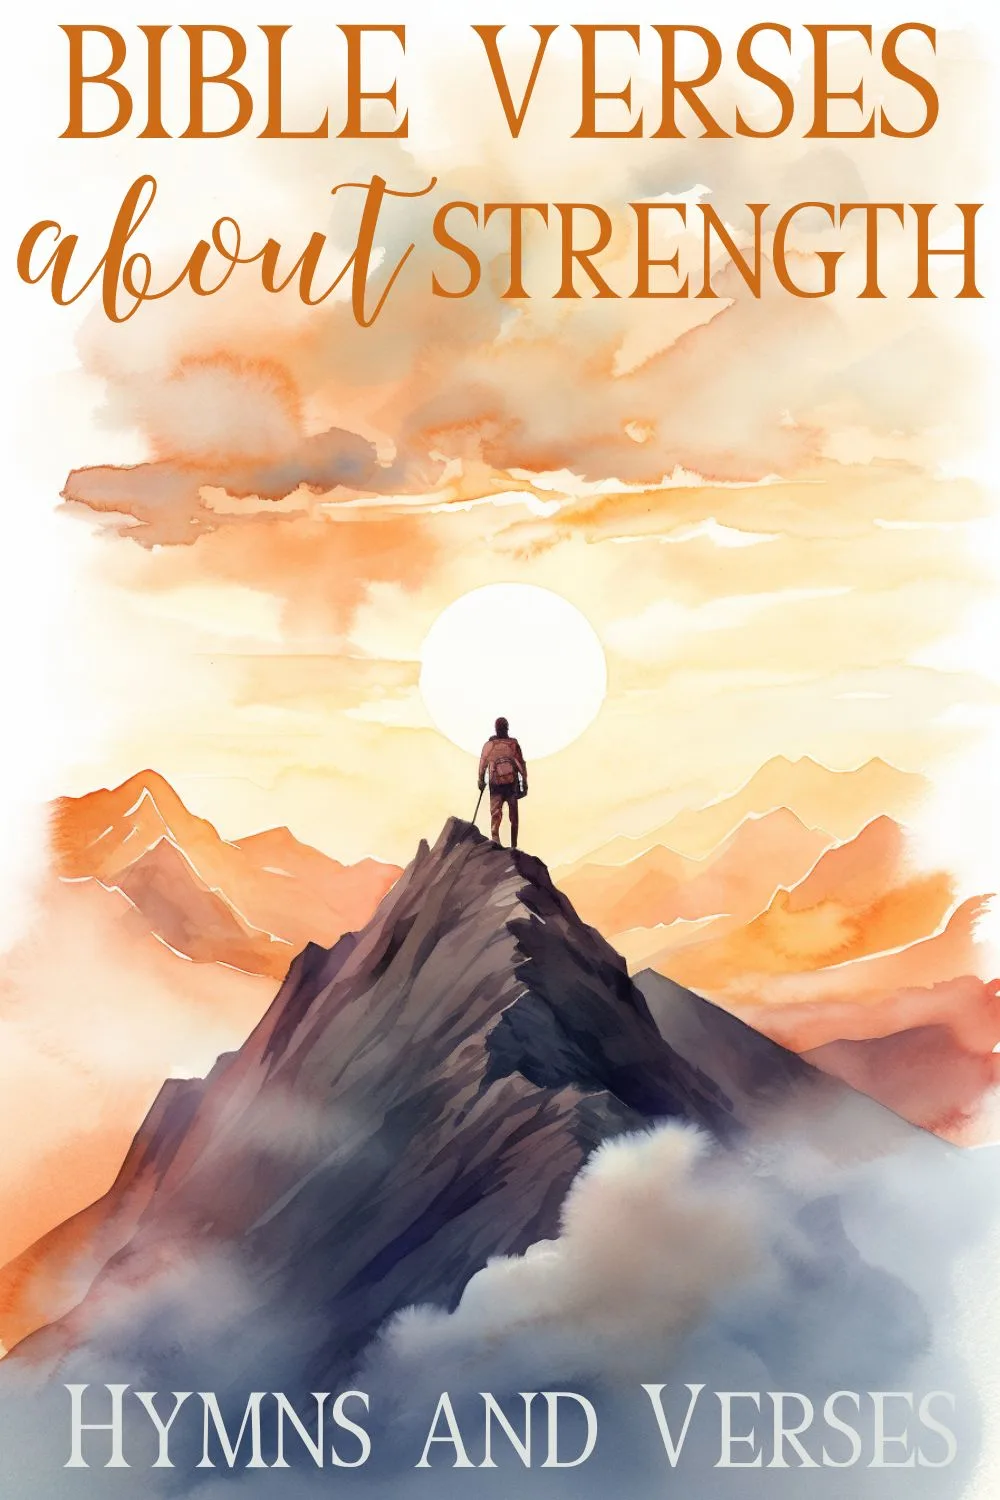 Pin images for Bible verses about strength - features a person standing at the top of a mountain